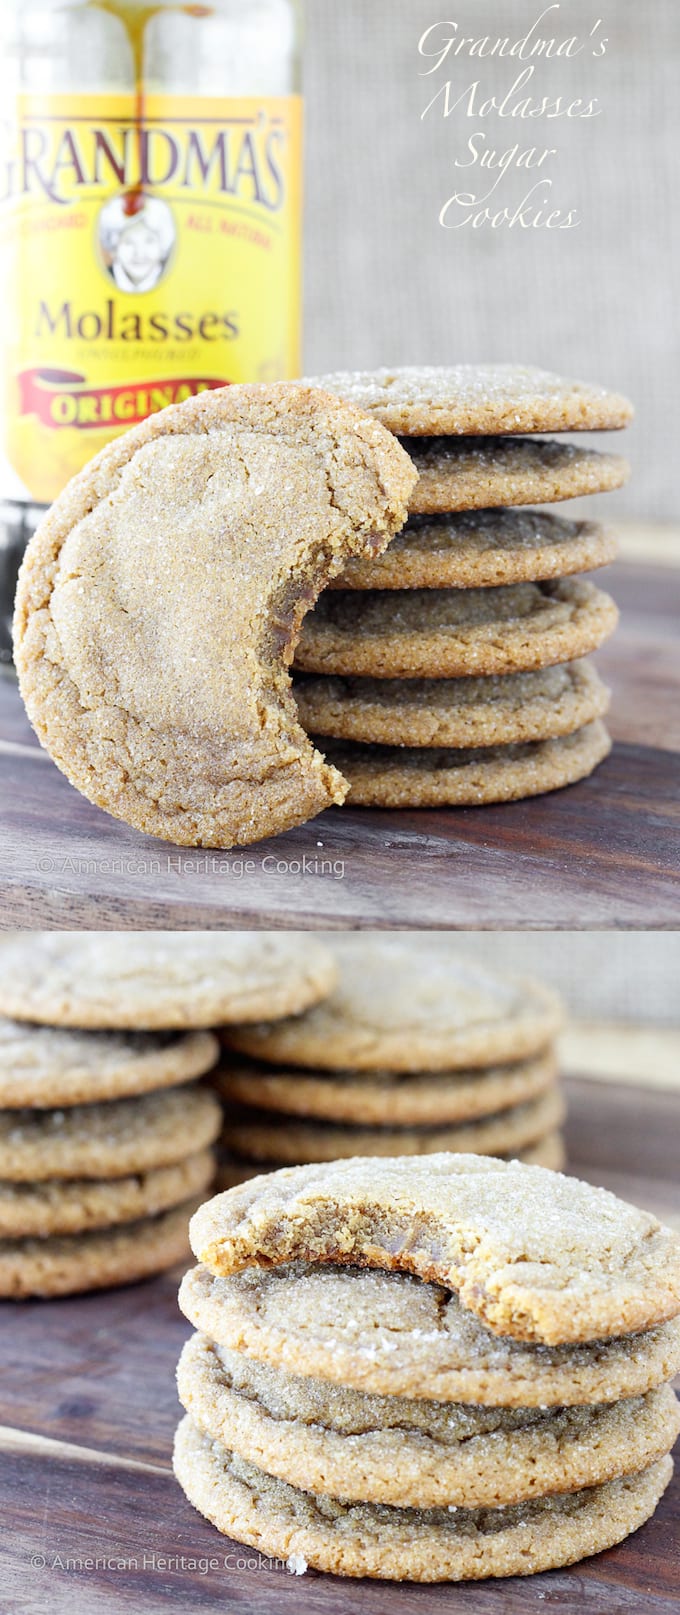 A recipe for my Grandma's Molasses Sugar Cookies | Crispy on the outside and chewy within! The perfect cross between a gingersnap, sugar cookie and gingerbread! 